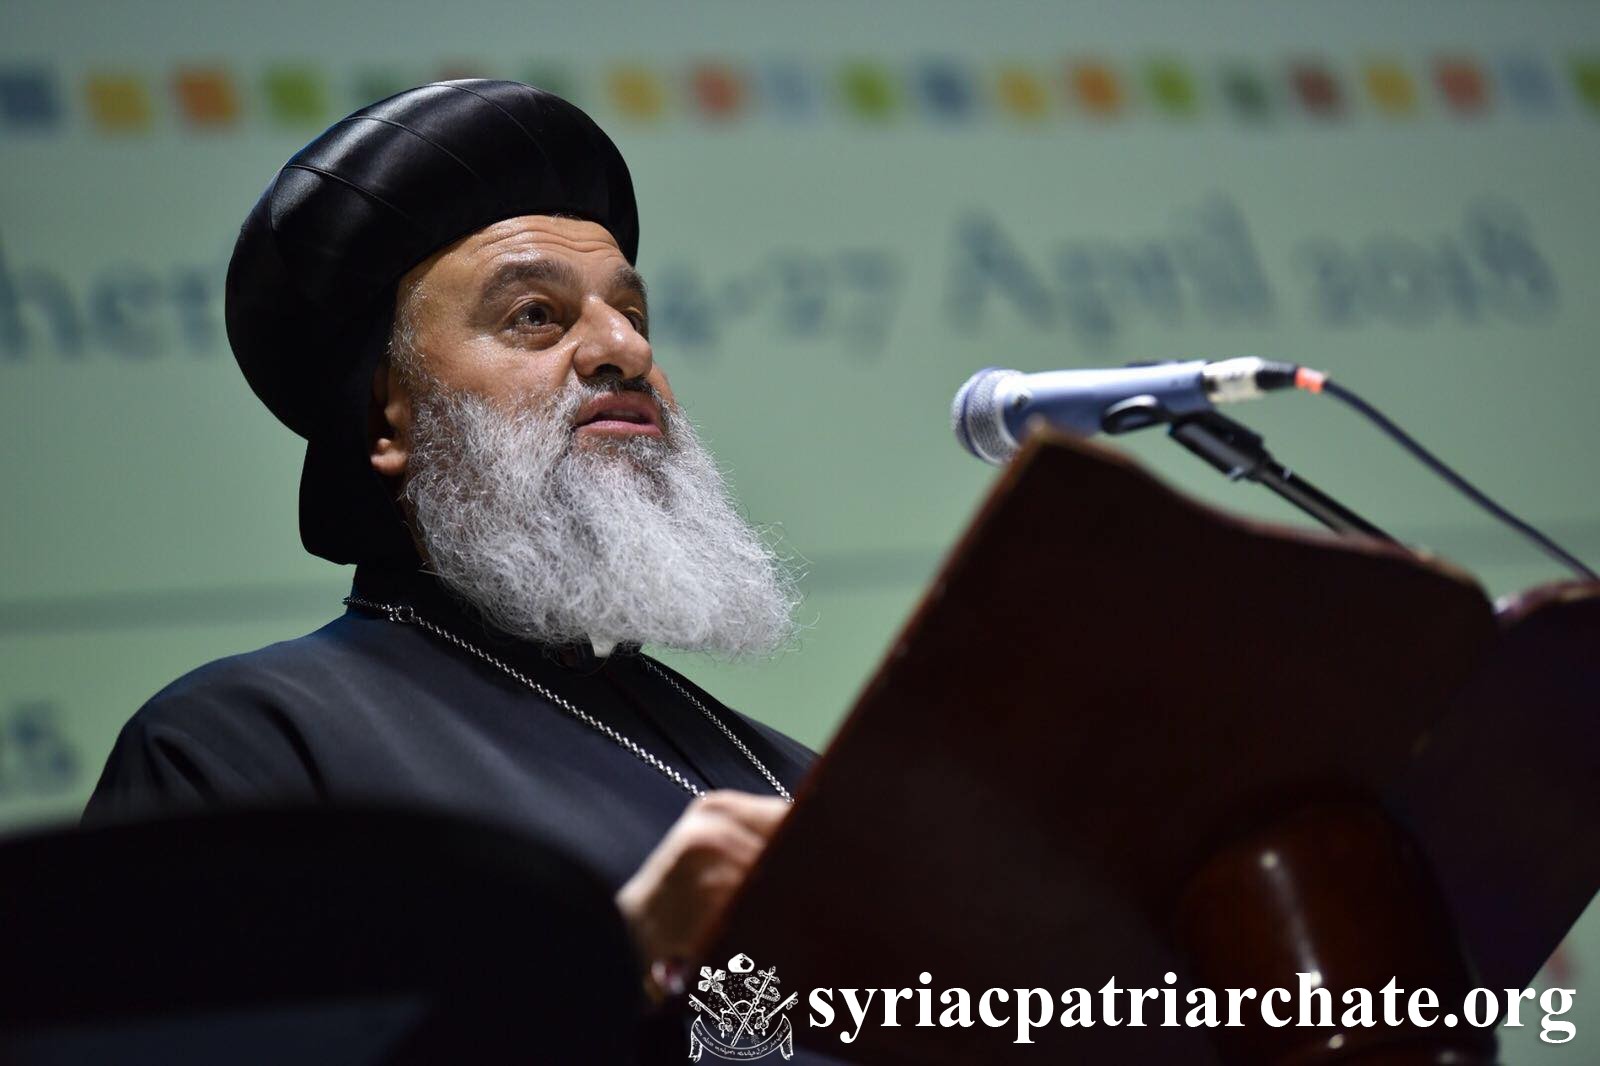 Following Christ together in discrimination, persecution, martyrdom: What does this mean for the global church today? – Patriarch Mor Ignatius Aphrem II